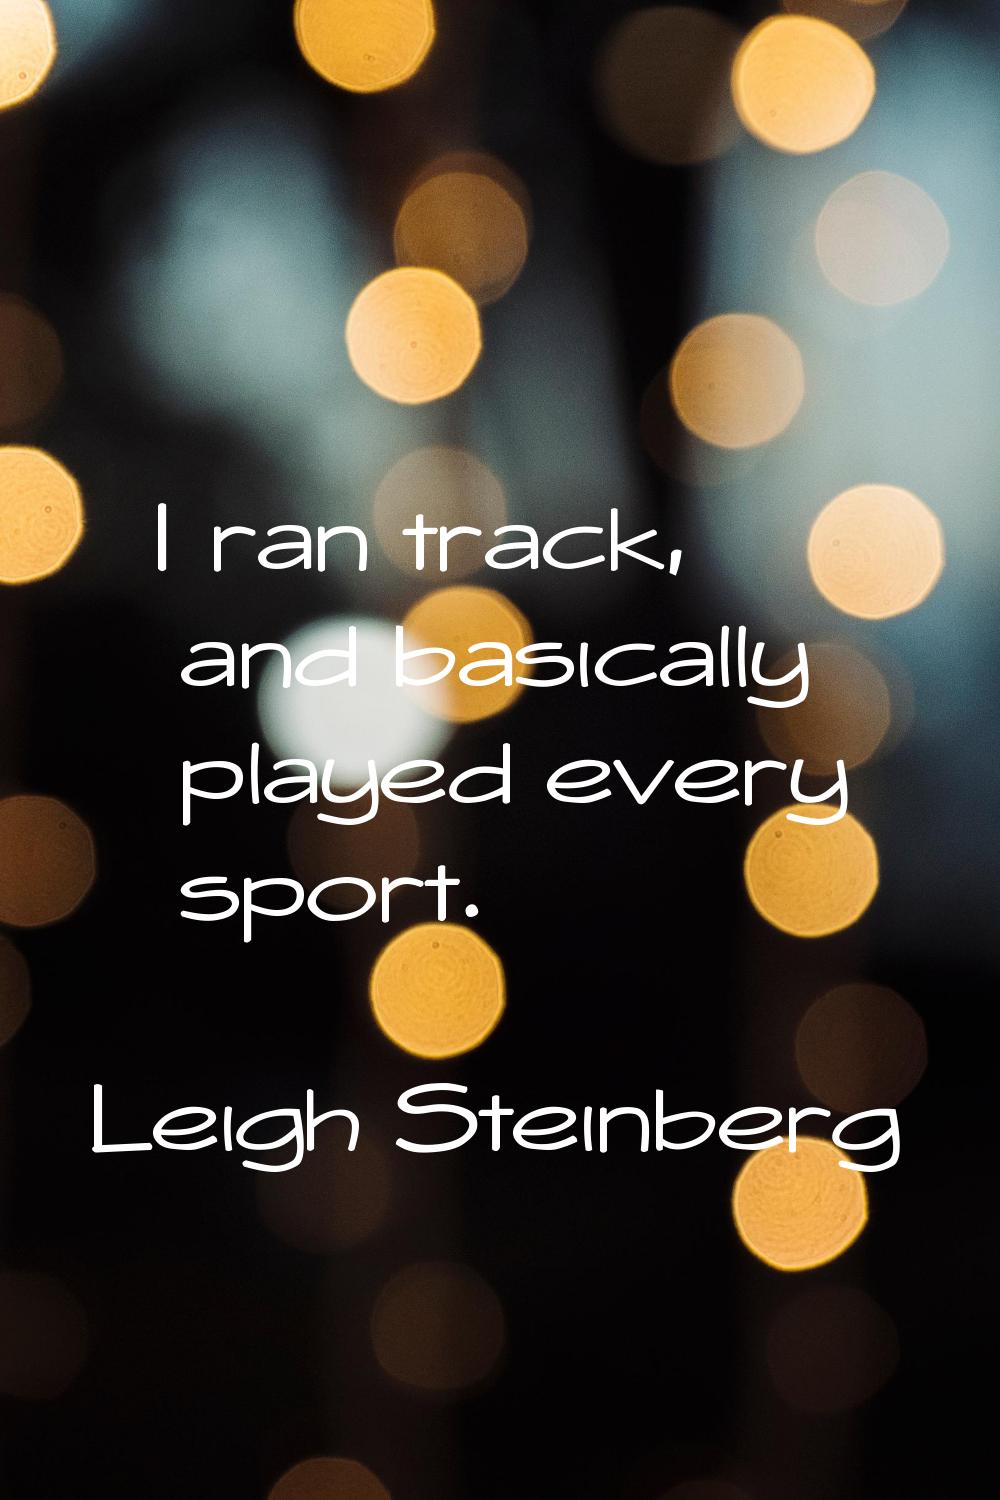 I ran track, and basically played every sport.